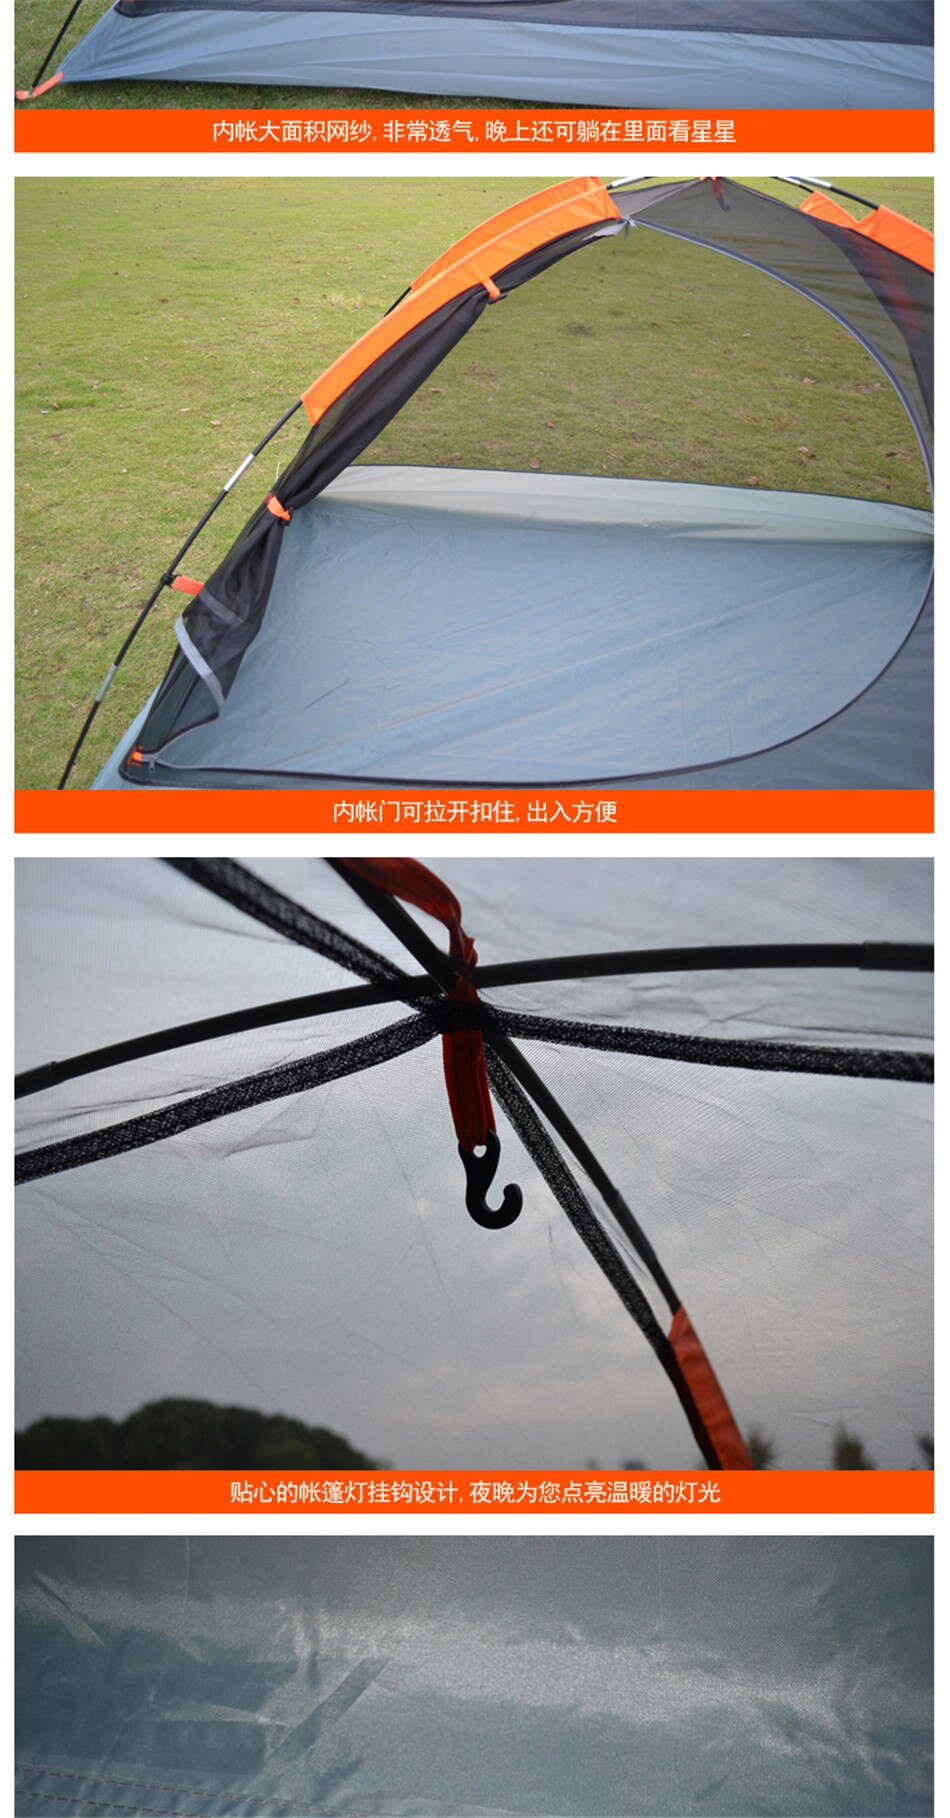 Cheap Goat Tents Outdoor Camping 2